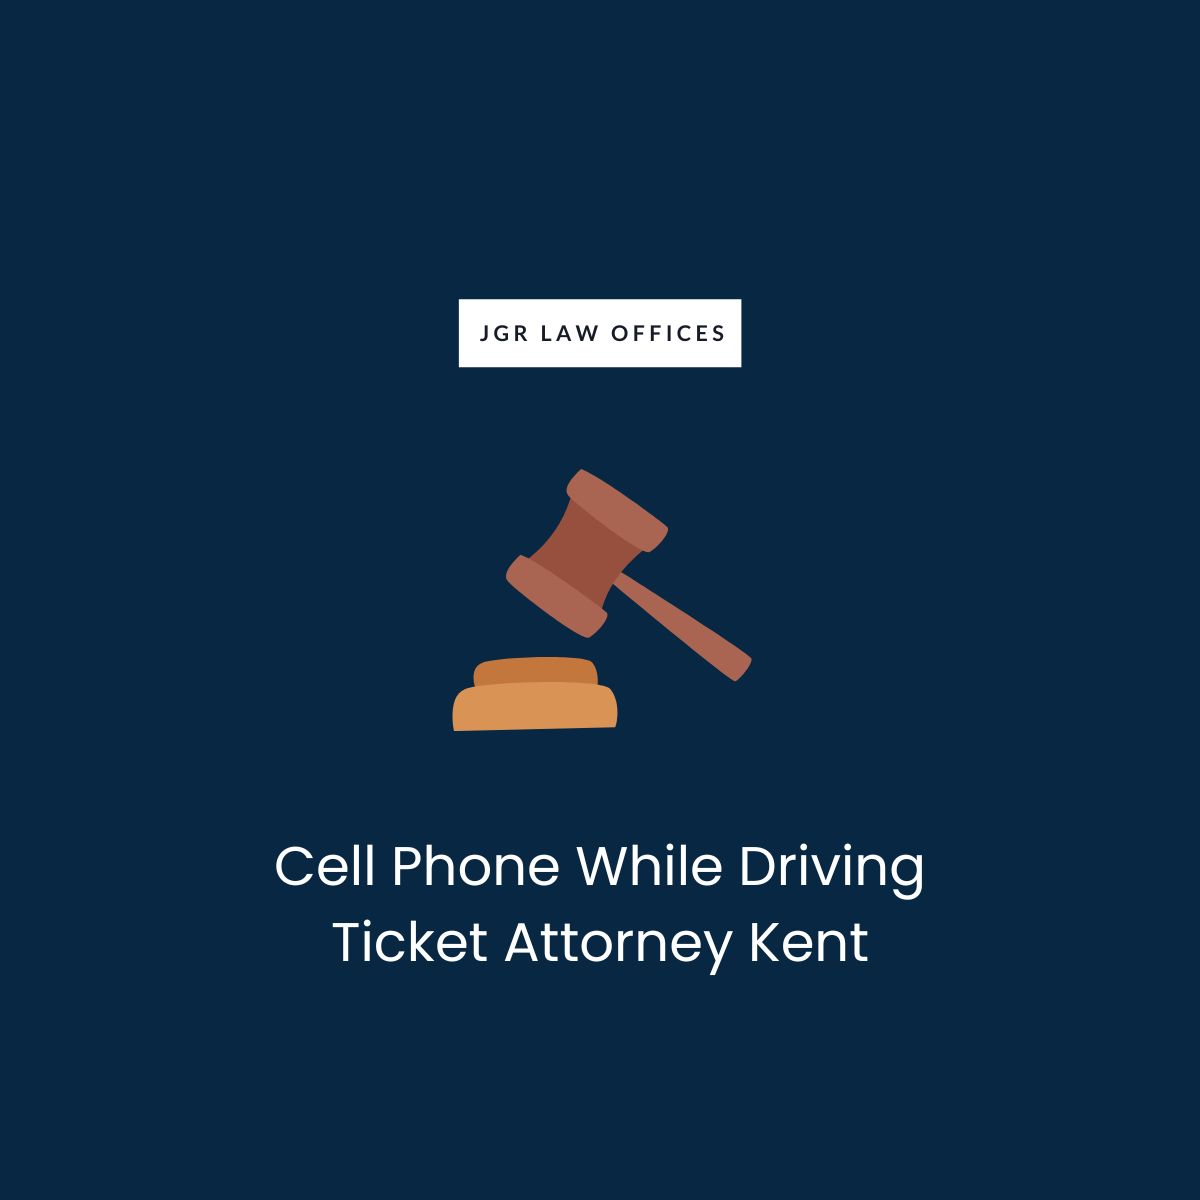 Cell Phone While Driving Ticket Attorney Kent